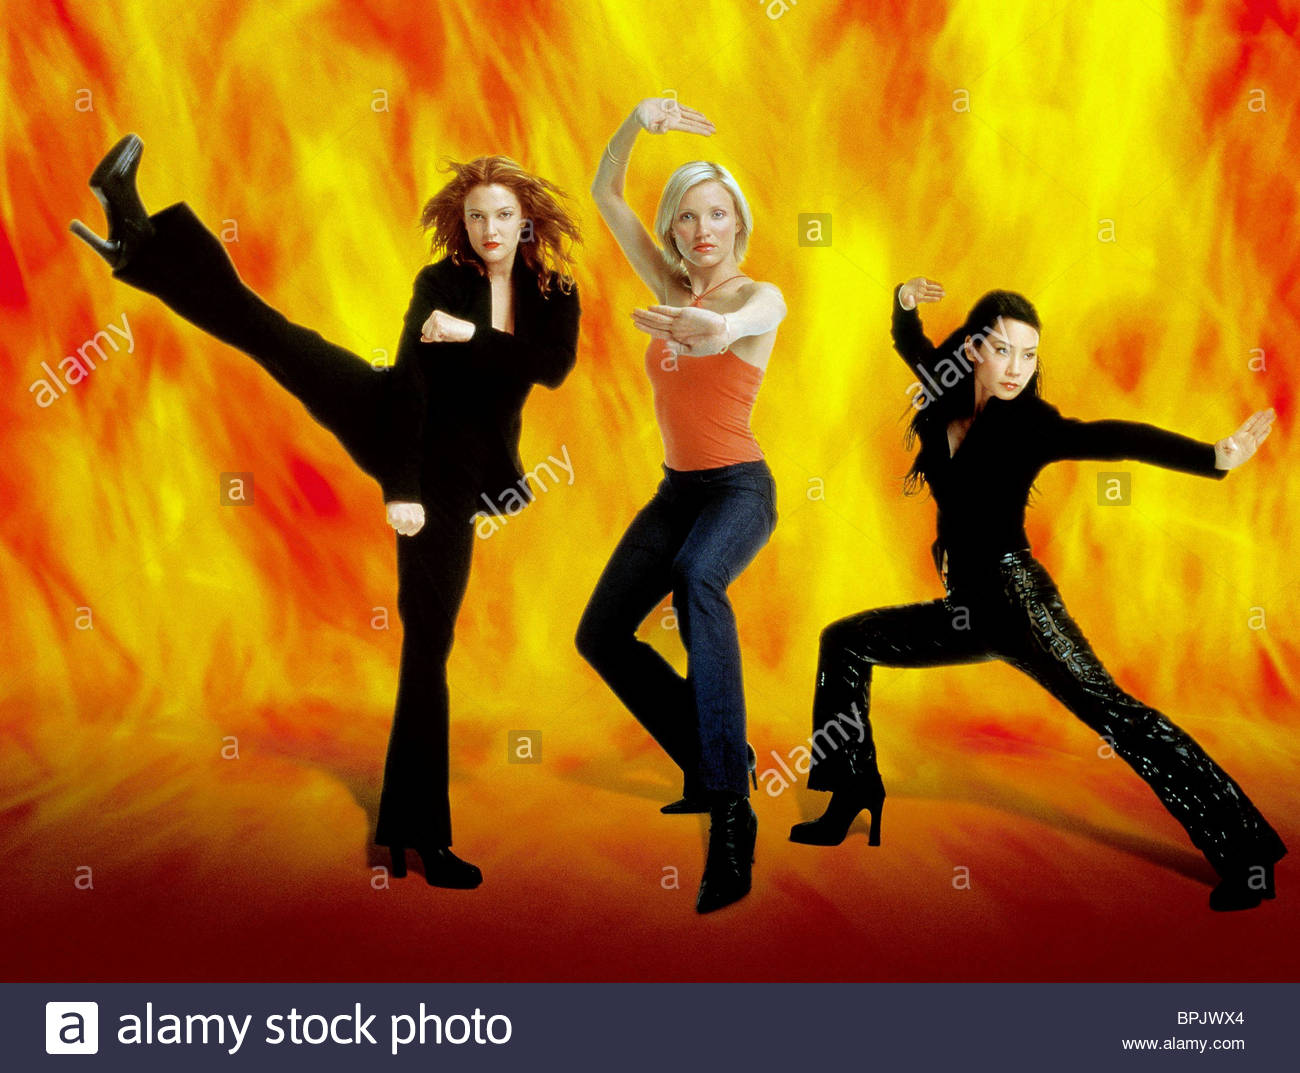 Nice wallpapers Charlie's Angels 1300x1073px